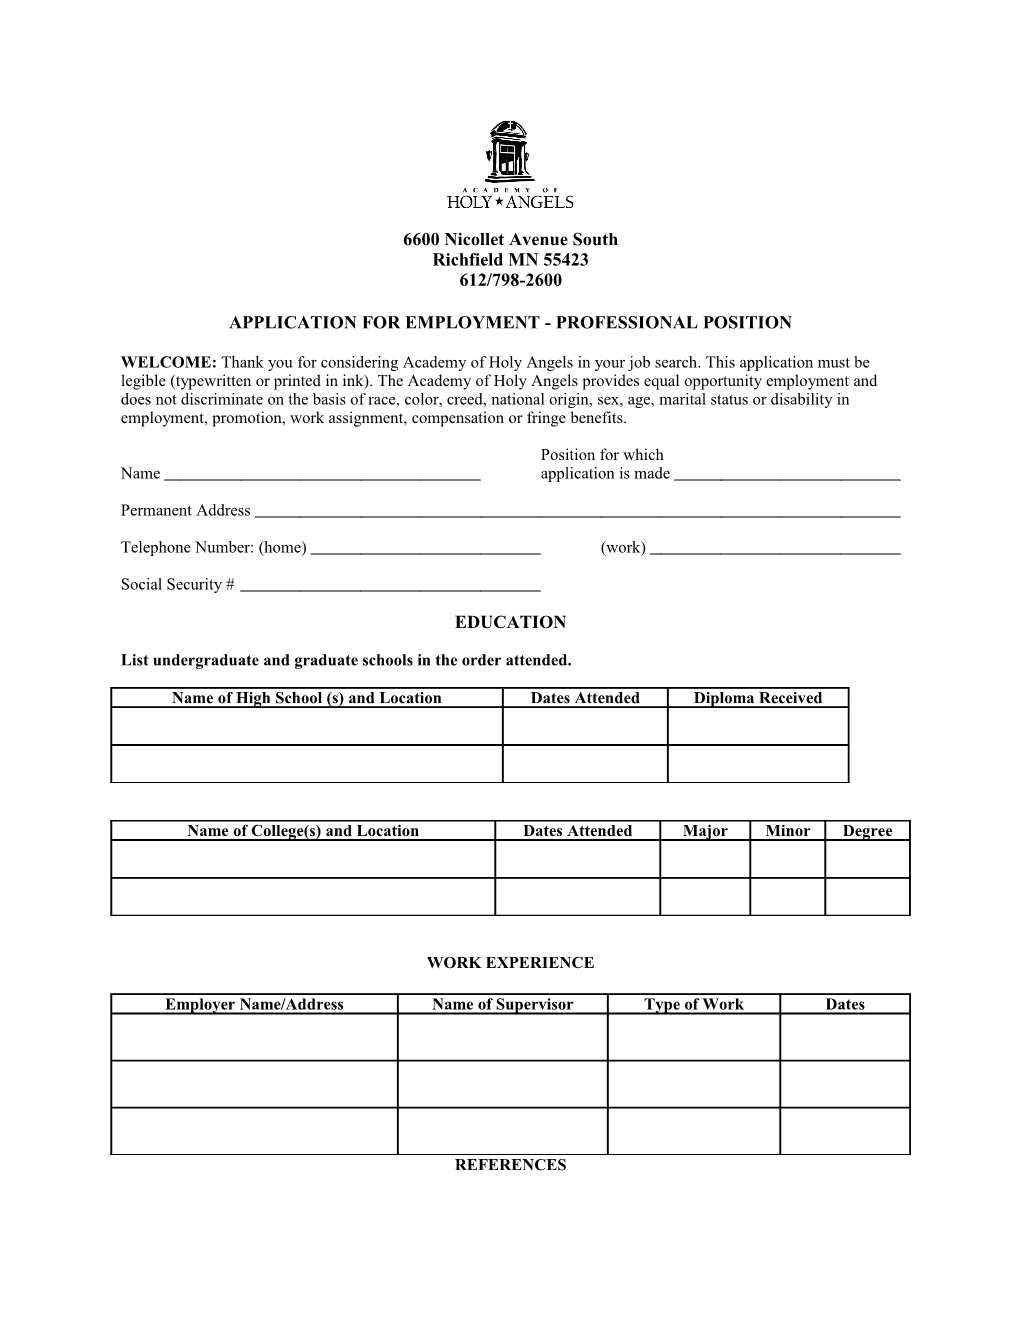 Application for Employment - Professional Position